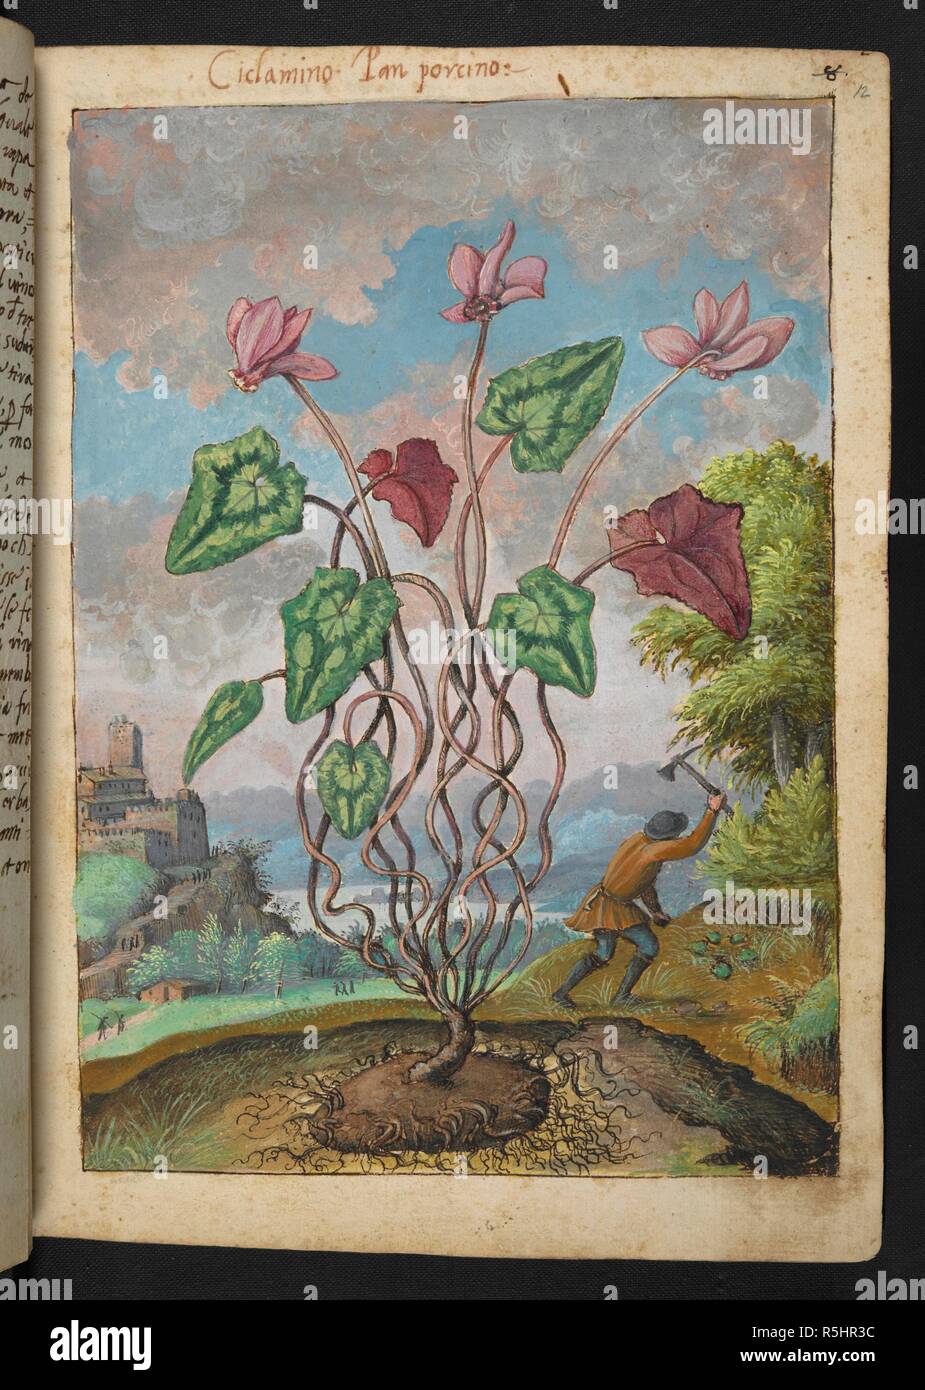 Ciclamino. Cyclamen is a genus of 23 species of perennial flowering plants in the family Primulaceae. . Coloured drawings of plants, copied from nature in the Roman States, by Gerardo Cibo. Vol. I. Pietro Andrea Mattioli, Physician, of Siena: Extracts from his edition of Dioscorides' 'de re Medica':. Italy, c. 1564-1584. Source: Add. 22332 f.12. Language: Italian. Author: Cibo, Gheraldo. Stock Photo